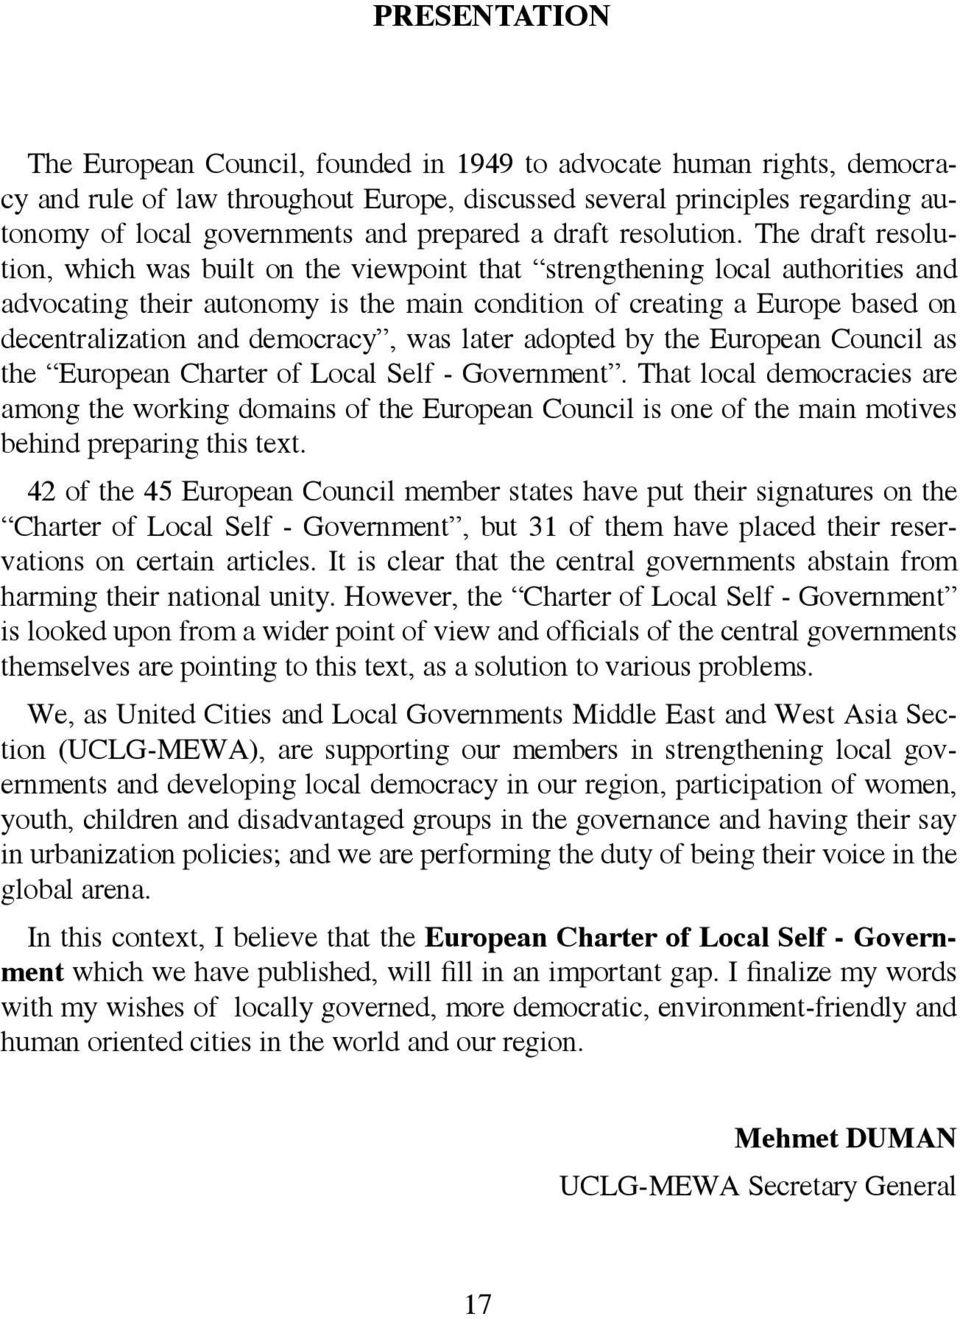 The draft resolution, which was built on the viewpoint that strengthening local authorities and advocating their autonomy is the main condition of creating a Europe based on decentralization and